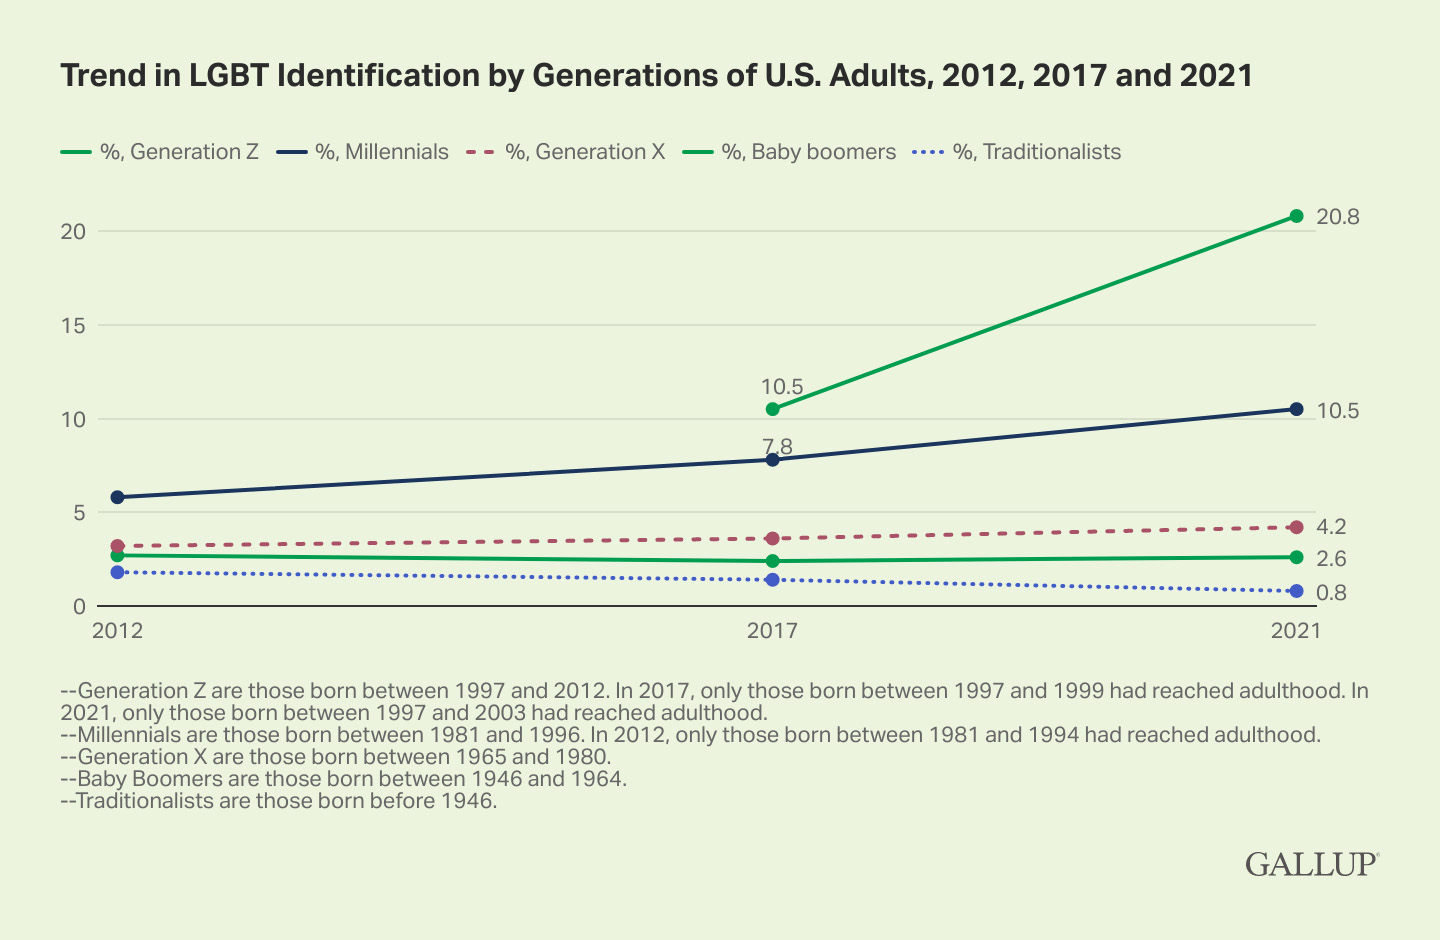 "Trend of LGBT identification by generations of American adults, 2012, 2017 and 2021" Graphic courtesy of Gallup